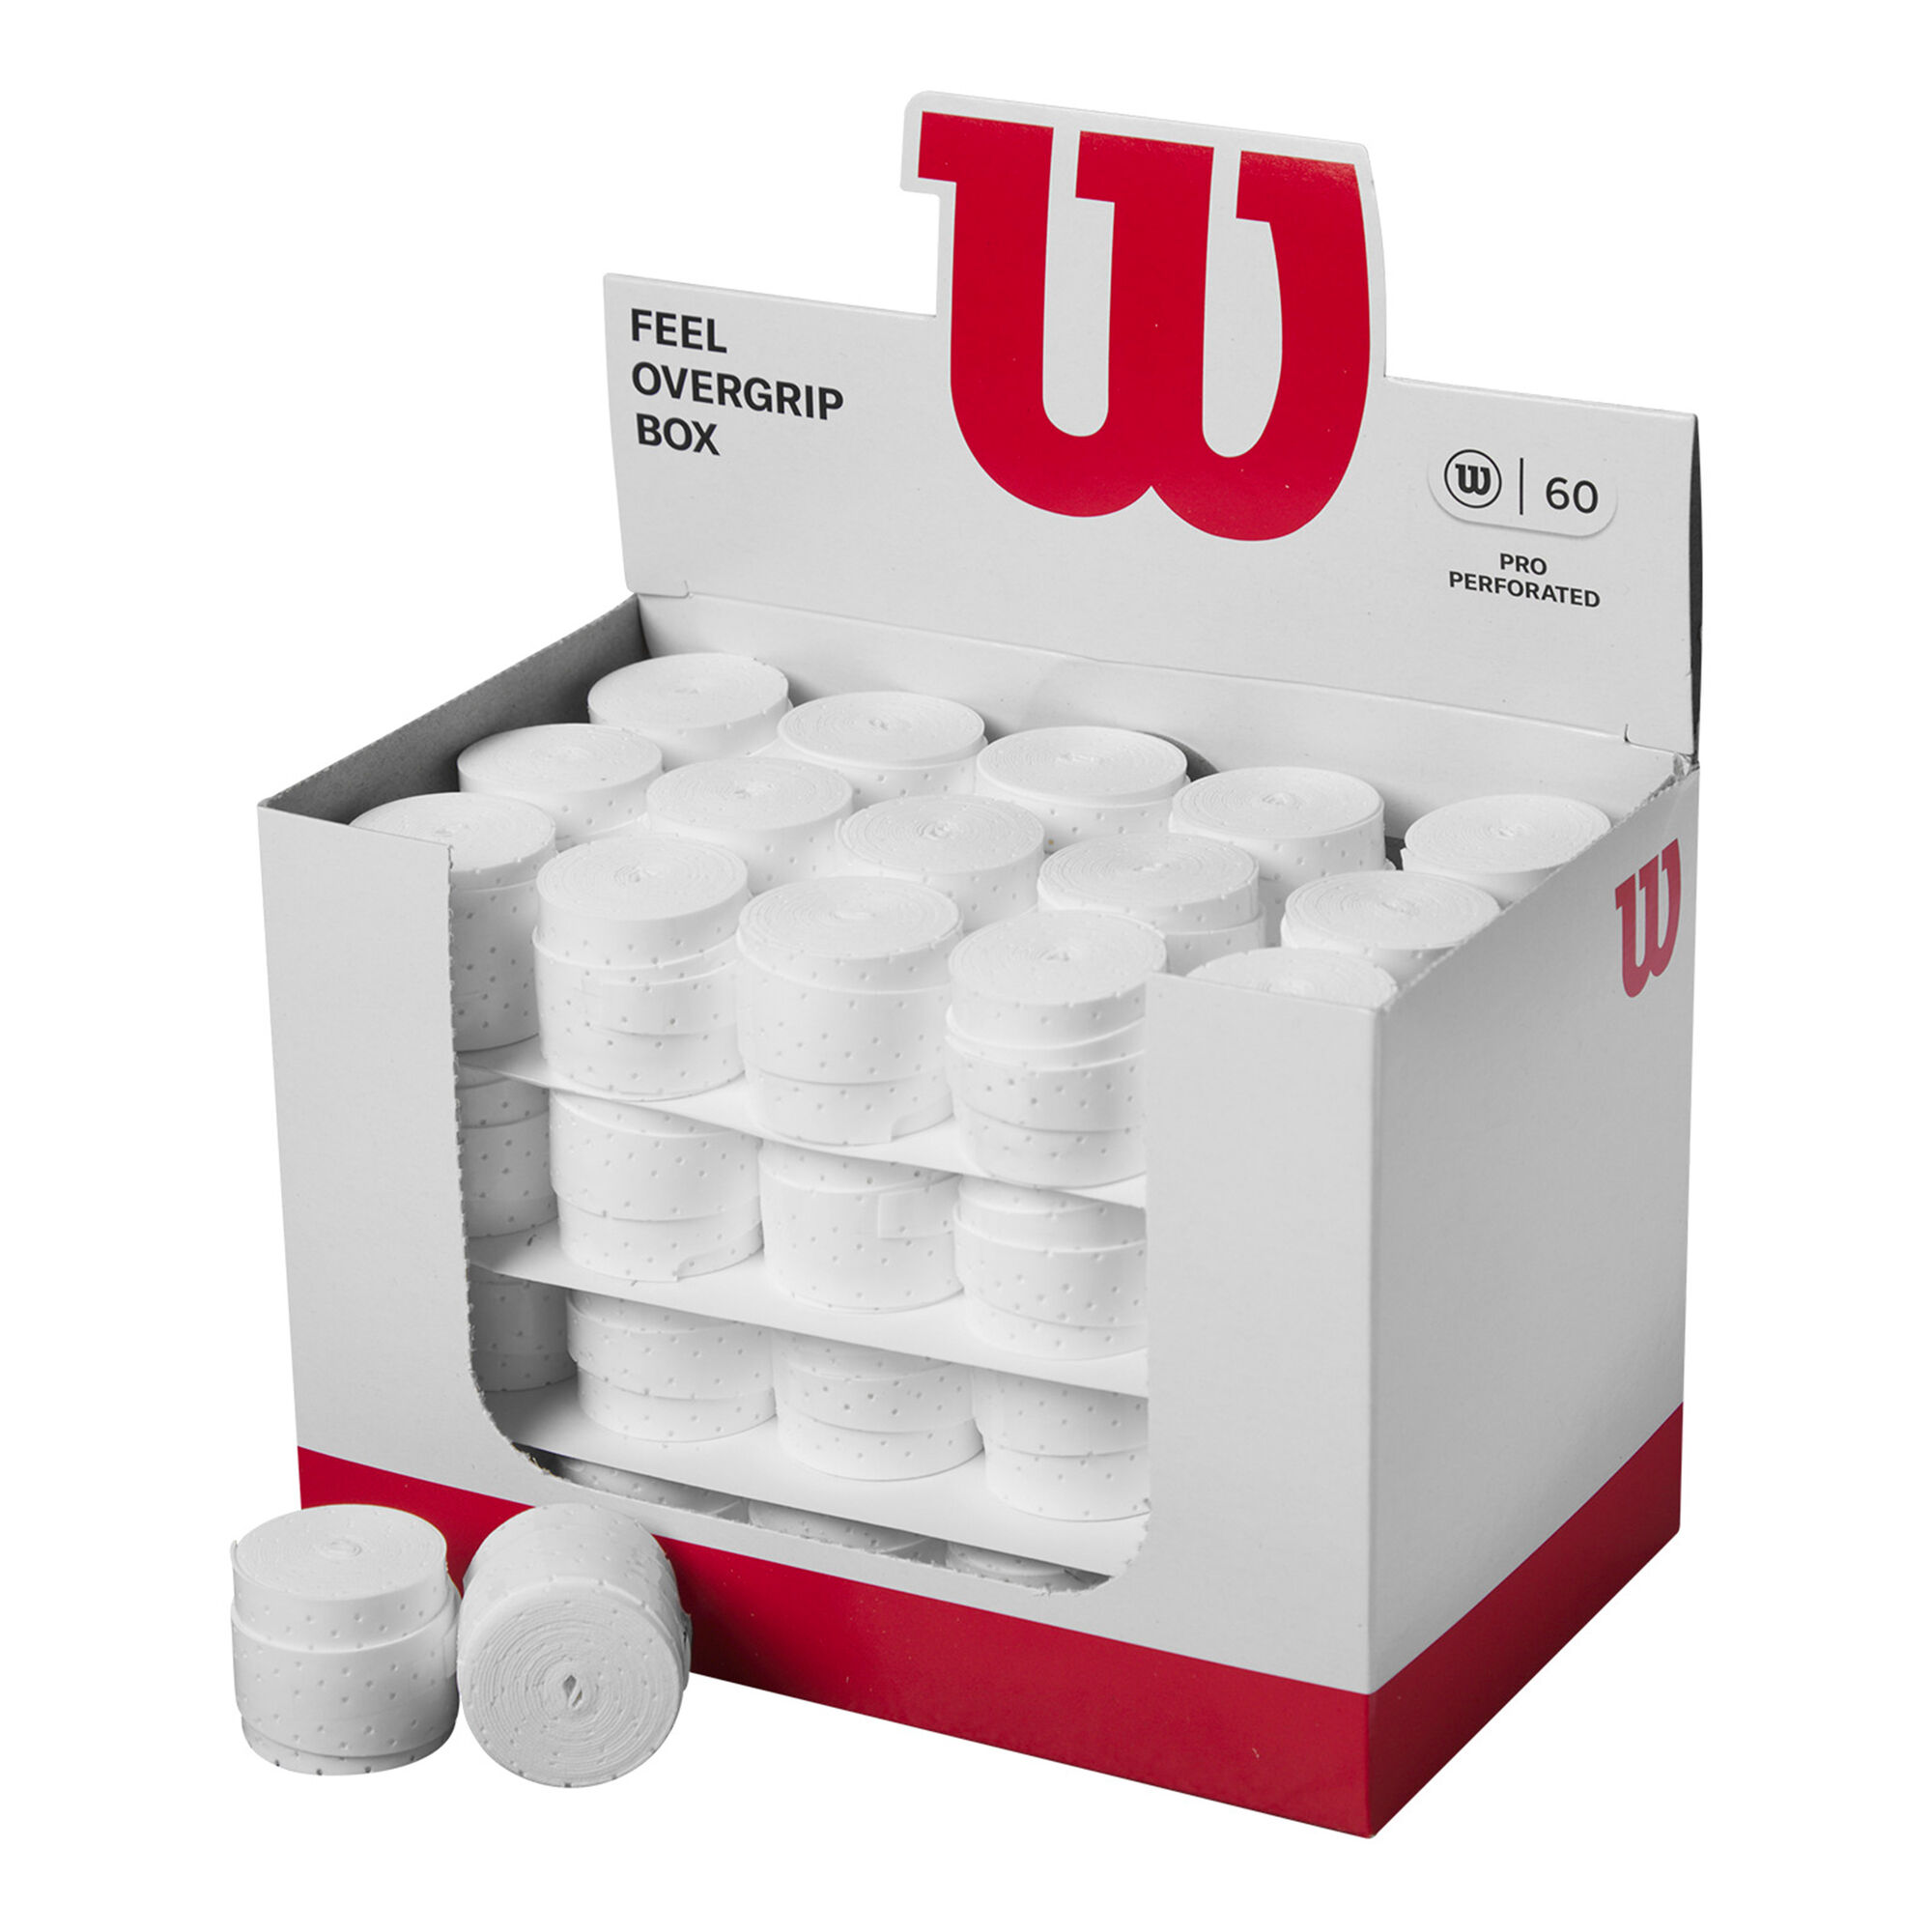 Wilson Pro Overgrip Perforated 12 Pack – Holabird Sports